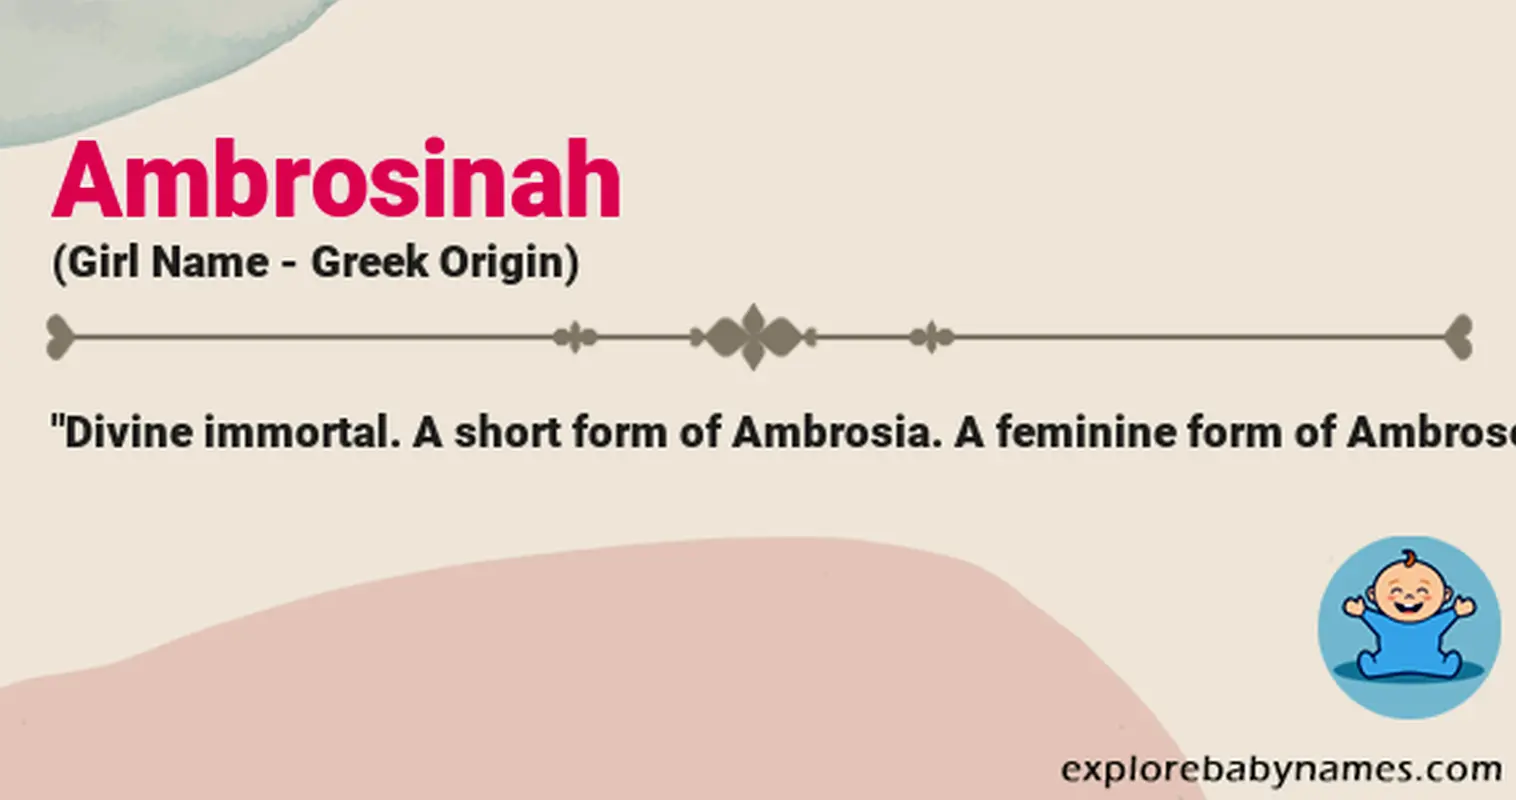 Meaning of Ambrosinah